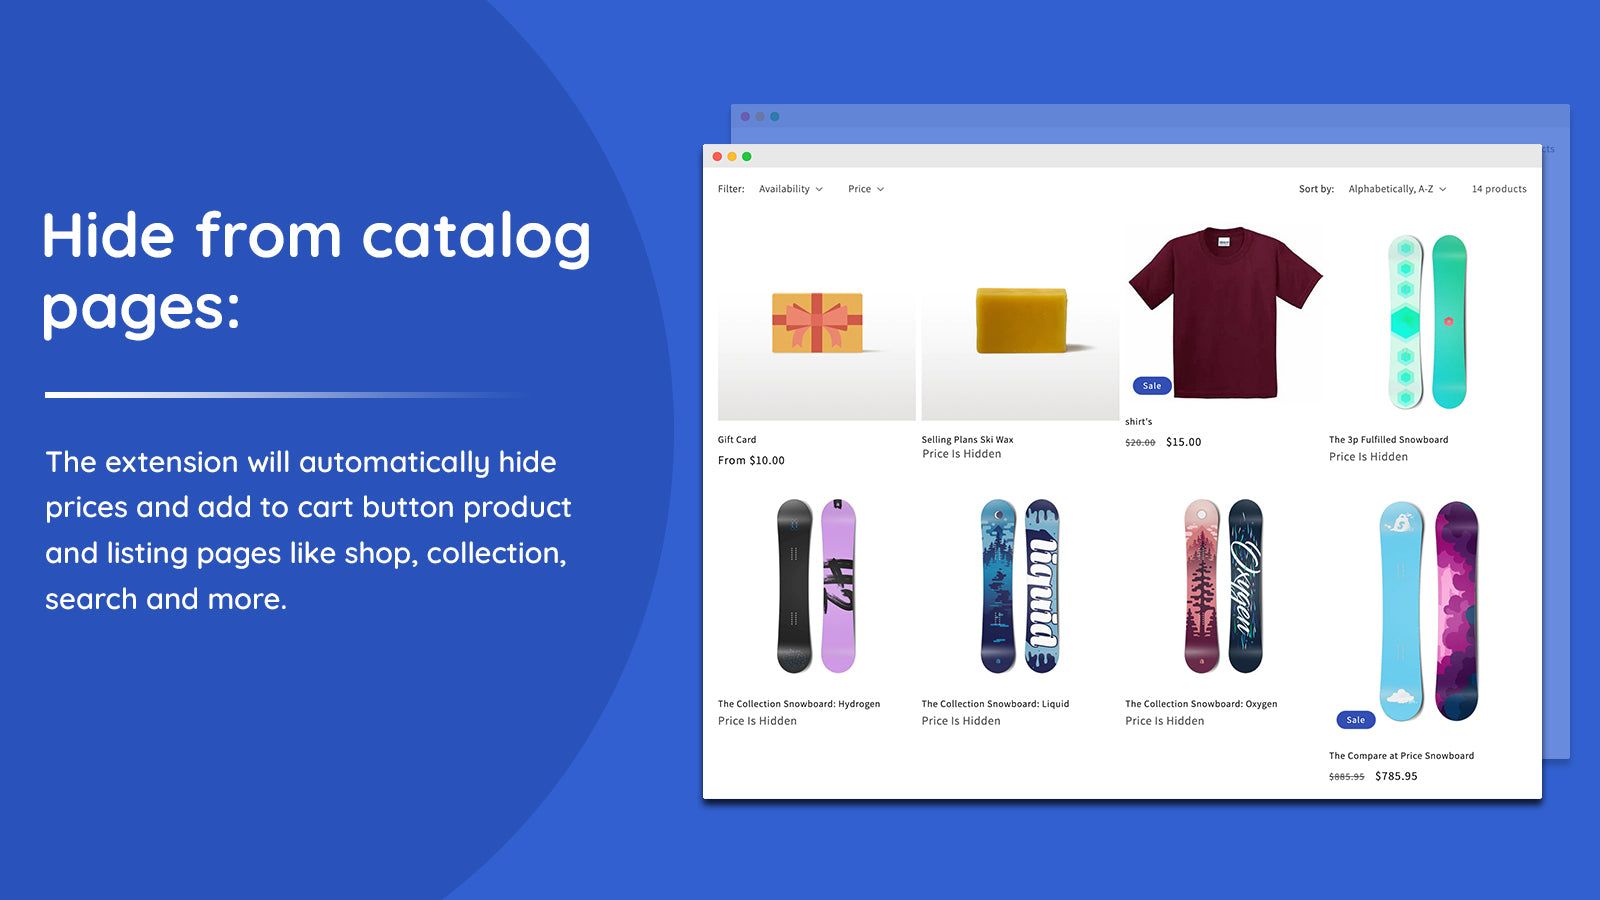 Hide price from catalog pages